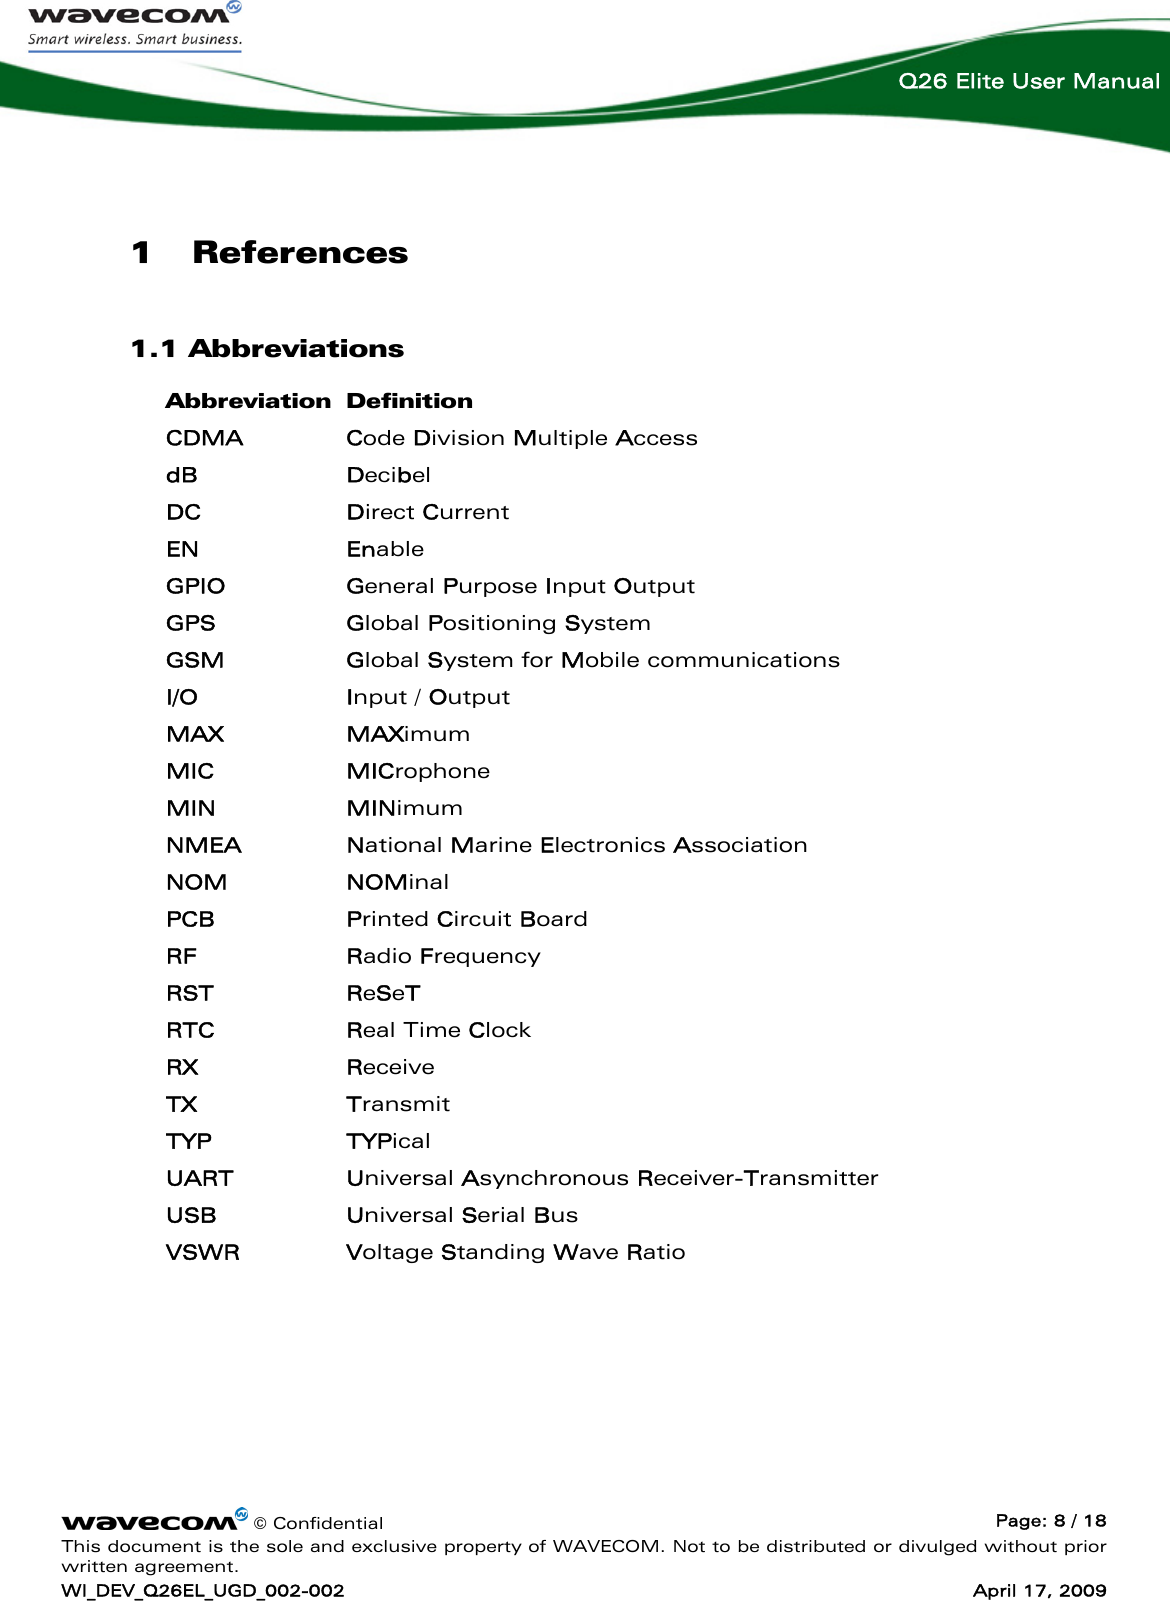    © Confidential  Page: 8 / 18 This document is the sole and exclusive property of WAVECOM. Not to be distributed or divulged without prior written agreement. WI_DEV_Q26EL_UGD_002-002  April 17, 2009  Q26 Elite User Manual 1 References 1.1 Abbreviations Abbreviation Definition CDMA Code Division Multiple Access dB Decibel DC Direct Current EN Enable GPIO General Purpose Input Output GPS Global Positioning System GSM Global System for Mobile communications I/O Input / Output MAX MAXimum MIC MICrophone MIN MINimum NMEA National Marine Electronics Association NOM NOMinal PCB Printed Circuit Board RF Radio Frequency RST ReSeT RTC   Real Time Clock RX Receive  TX Transmit TYP TYPical UART Universal Asynchronous Receiver-Transmitter USB Universal Serial Bus VSWR Voltage Standing Wave Ratio 